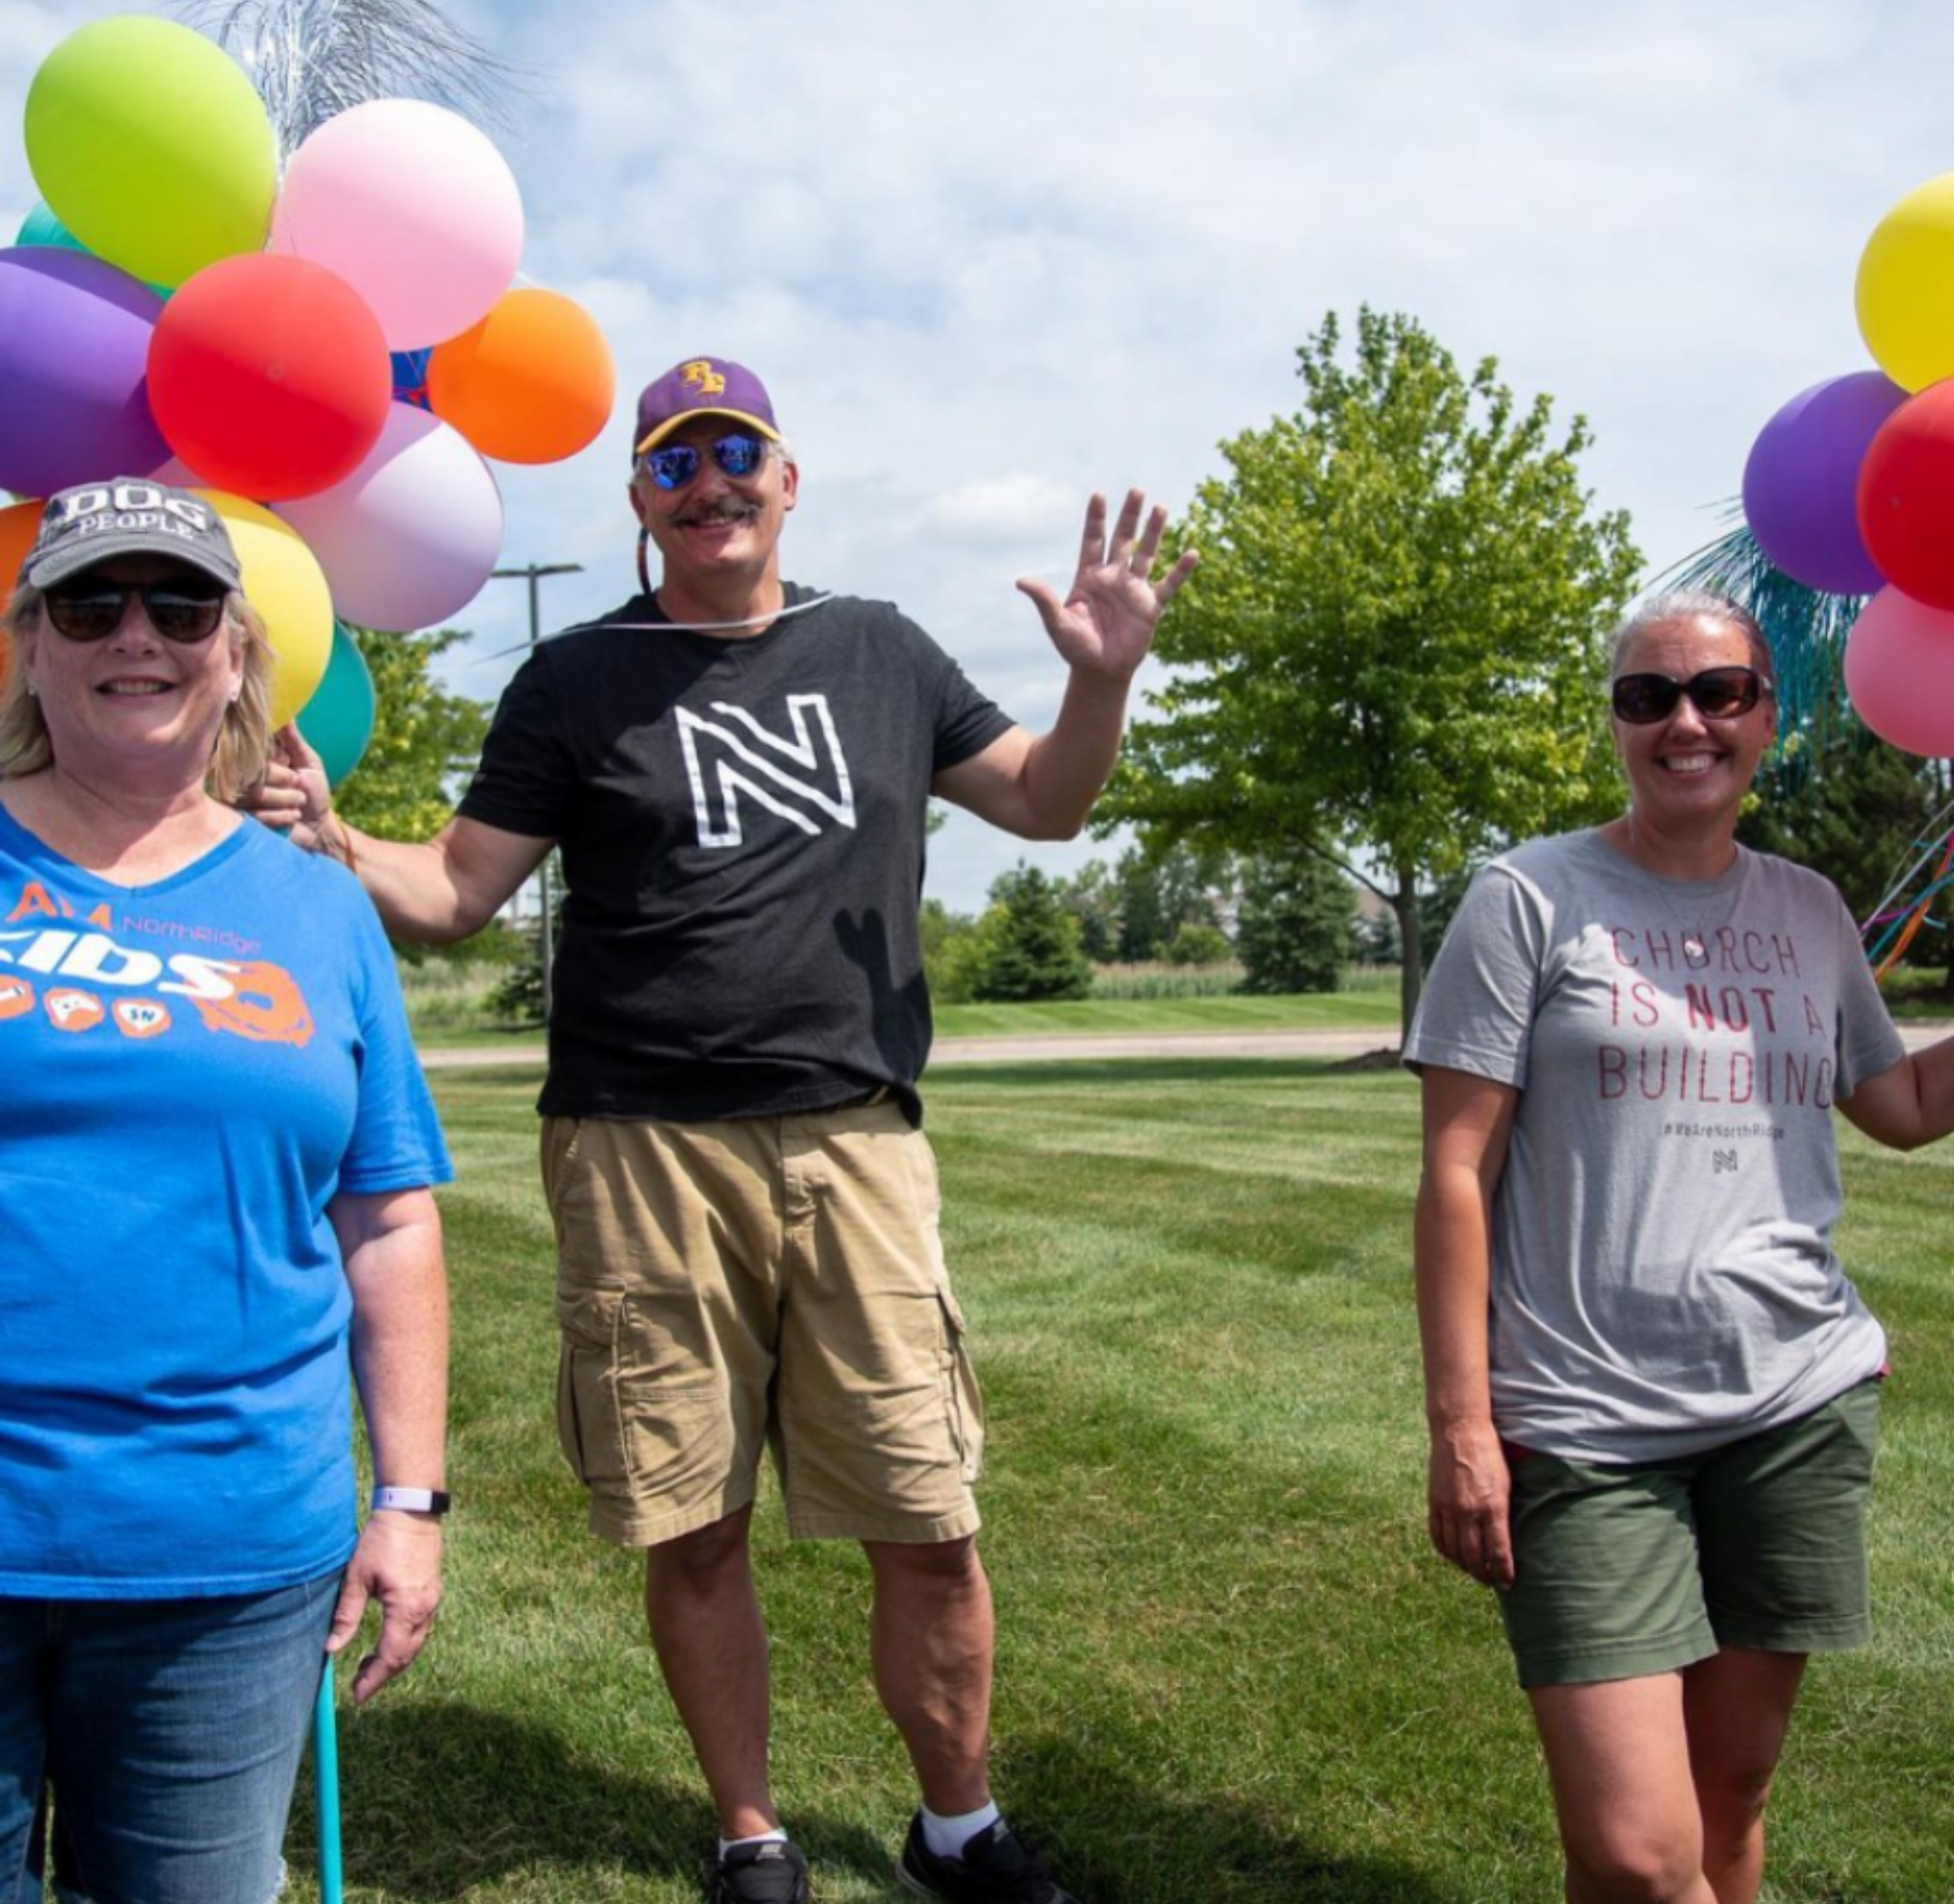 Three smiling volunteers with balloons